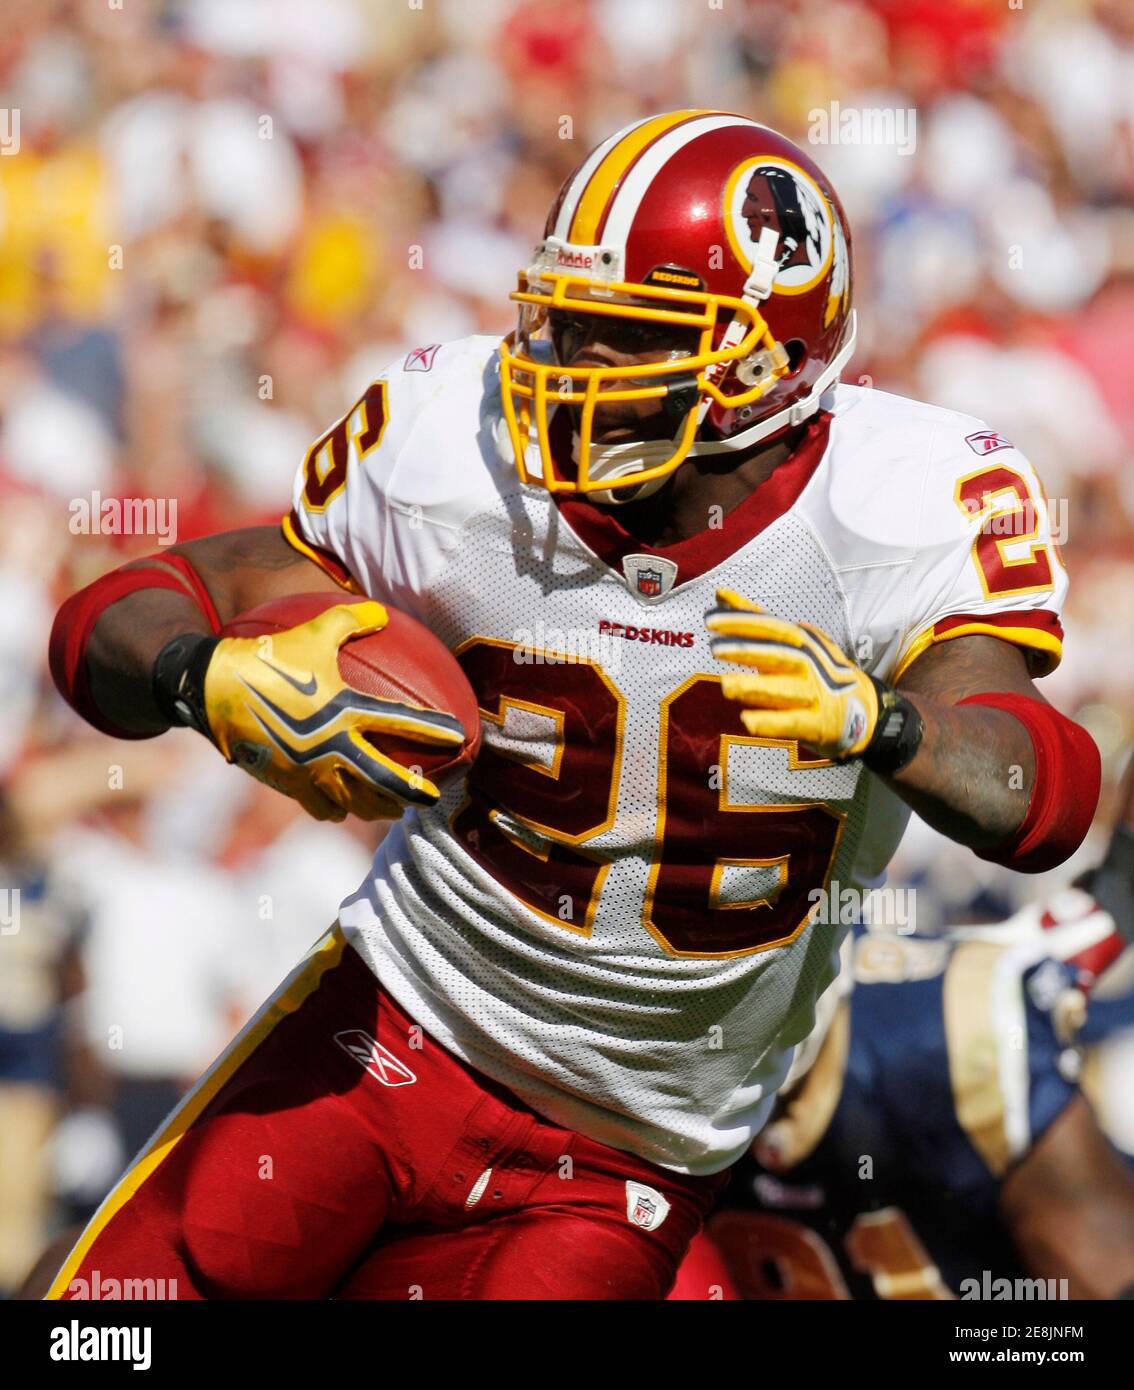 Washington Redskins running back Clinton Portis gains yards against the St. Louis Rams in the fourth quarter of their NFL football game in Landover, Maryland September 20, 2009.   REUTERS/Gary Cameron               (UNITED STATES) Stock Photo